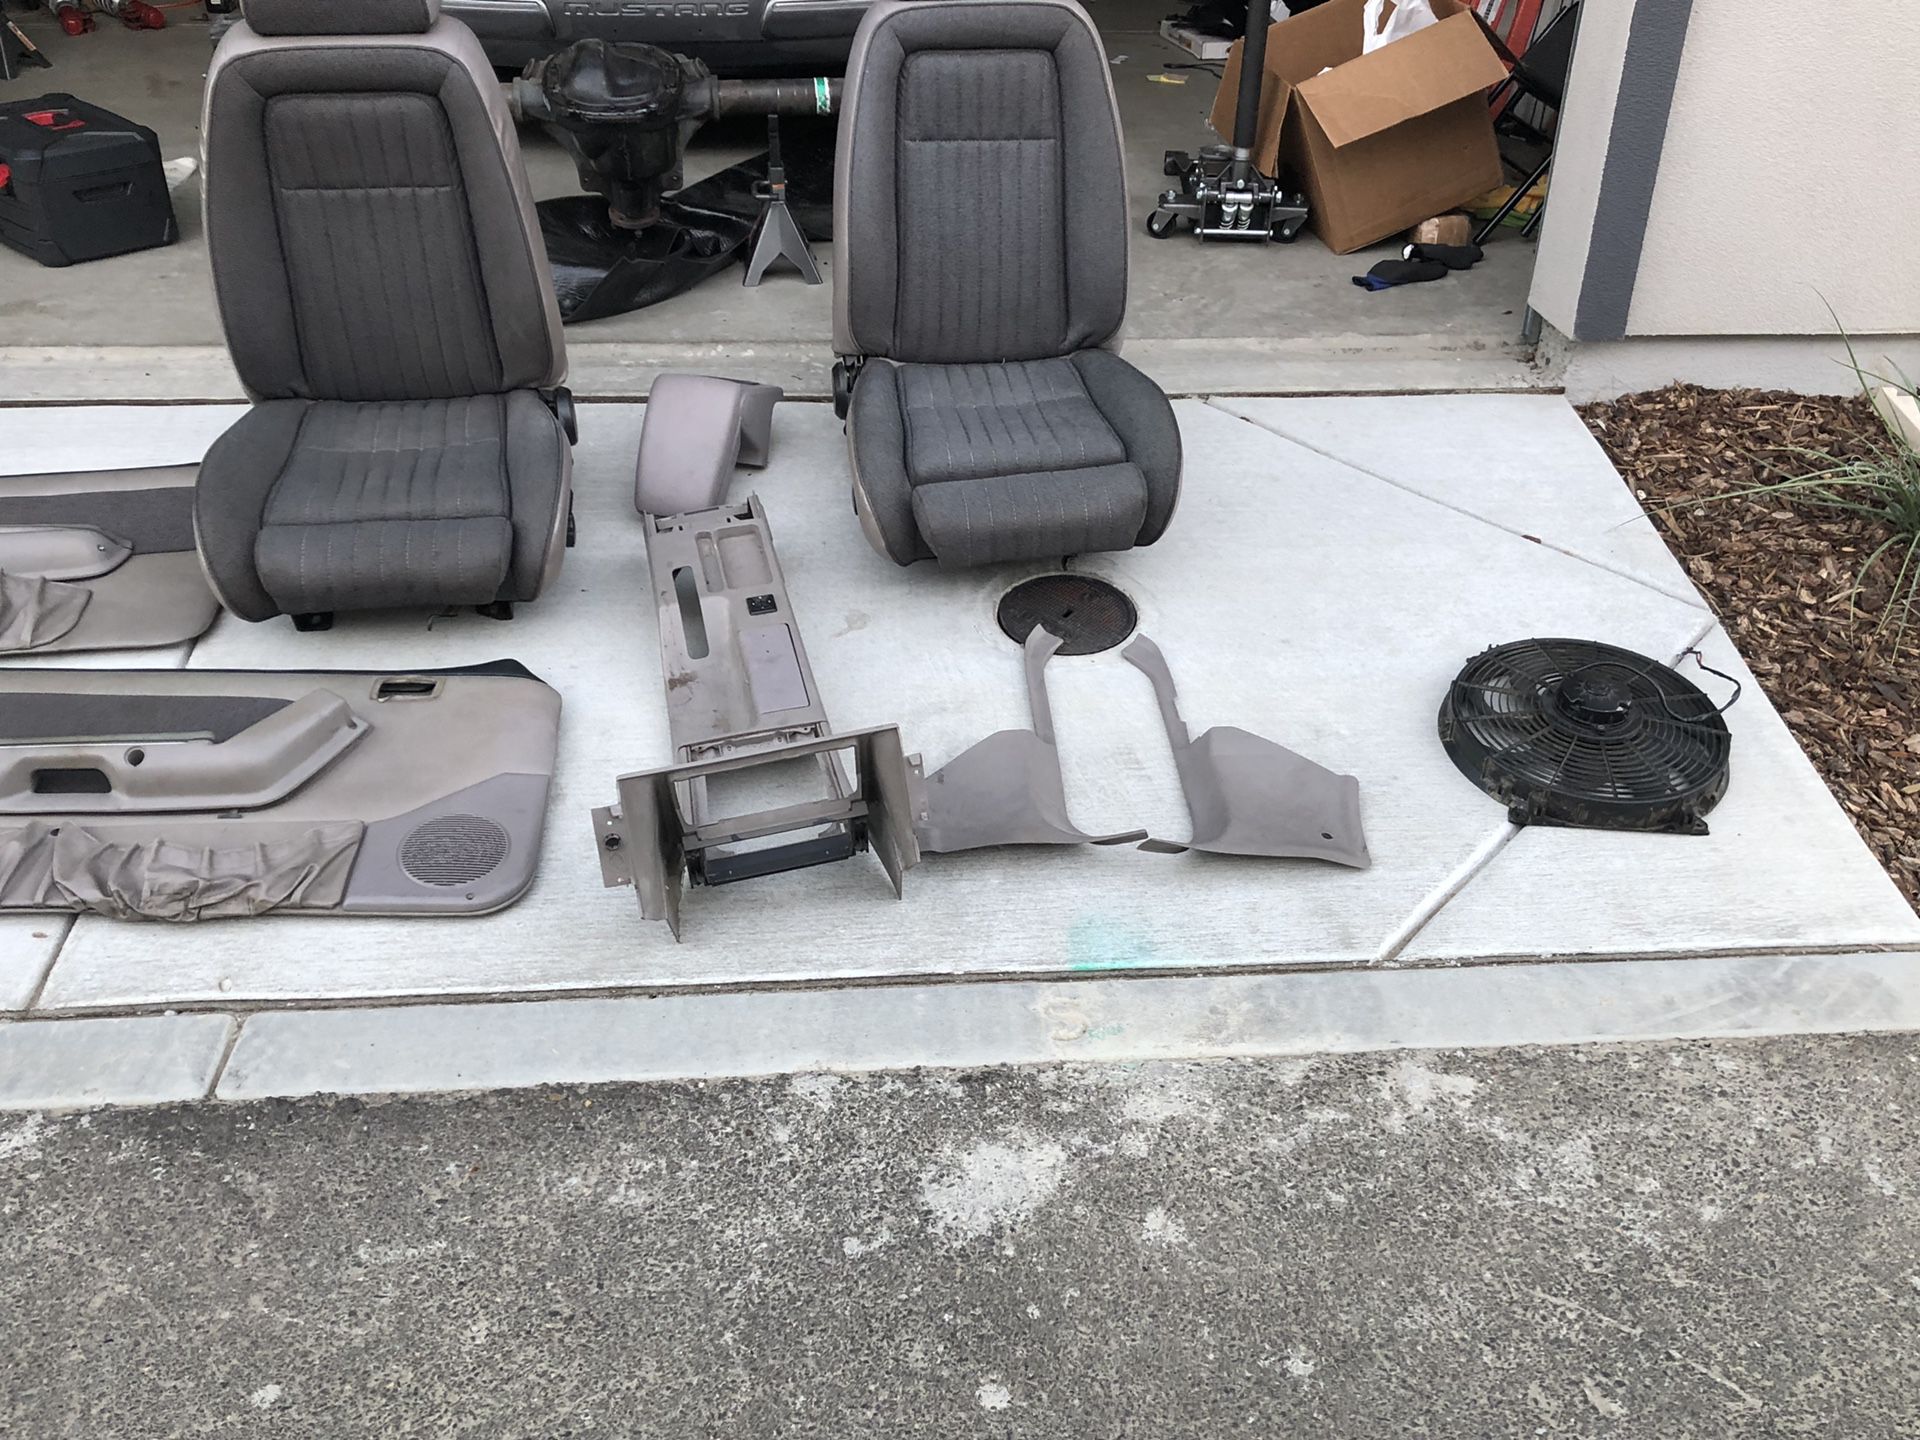 1990 Mustang front seats and fan